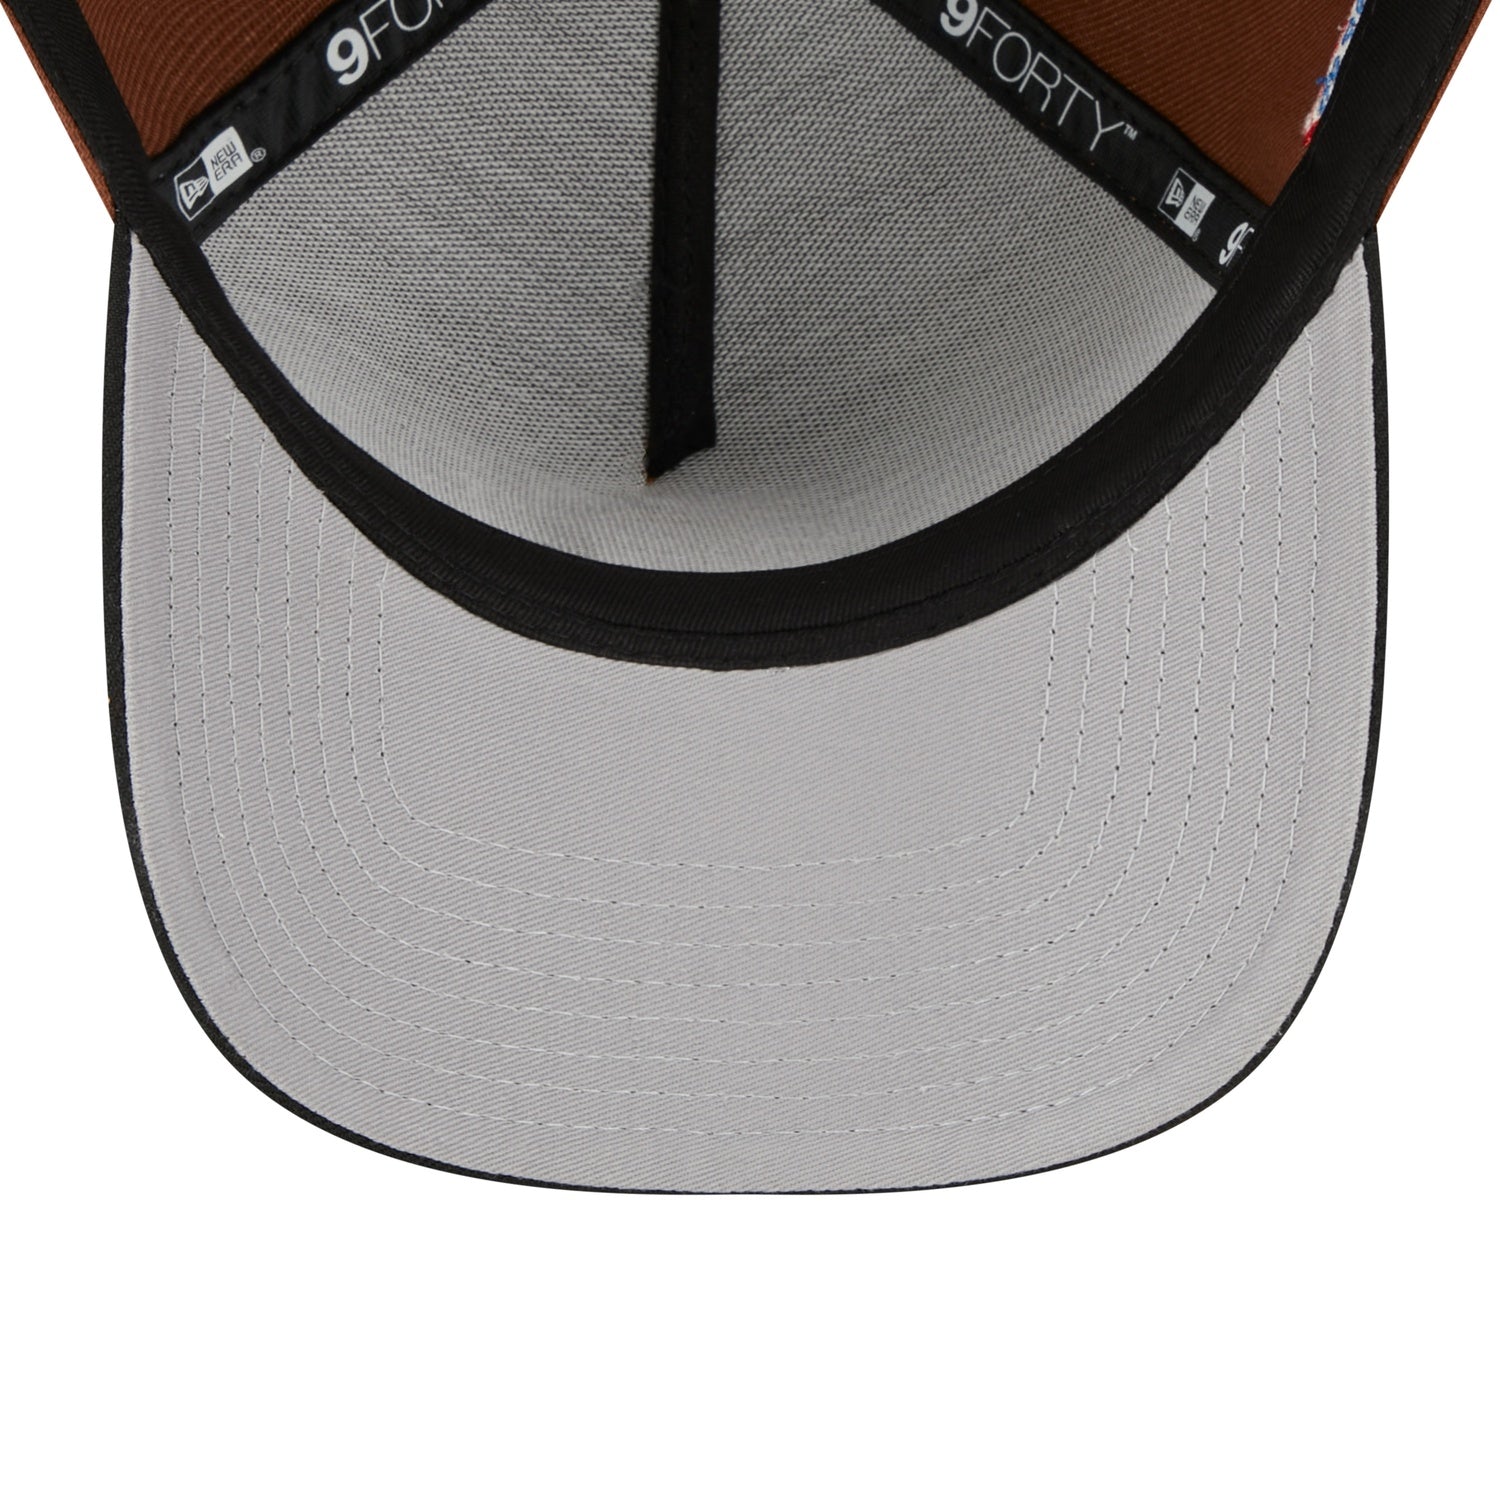 NEW ERA 9FORTY A-FRAME DETROIT TIGERS WORLD SERIES 1984 TWO TONE / GREY UV SNAPBACK